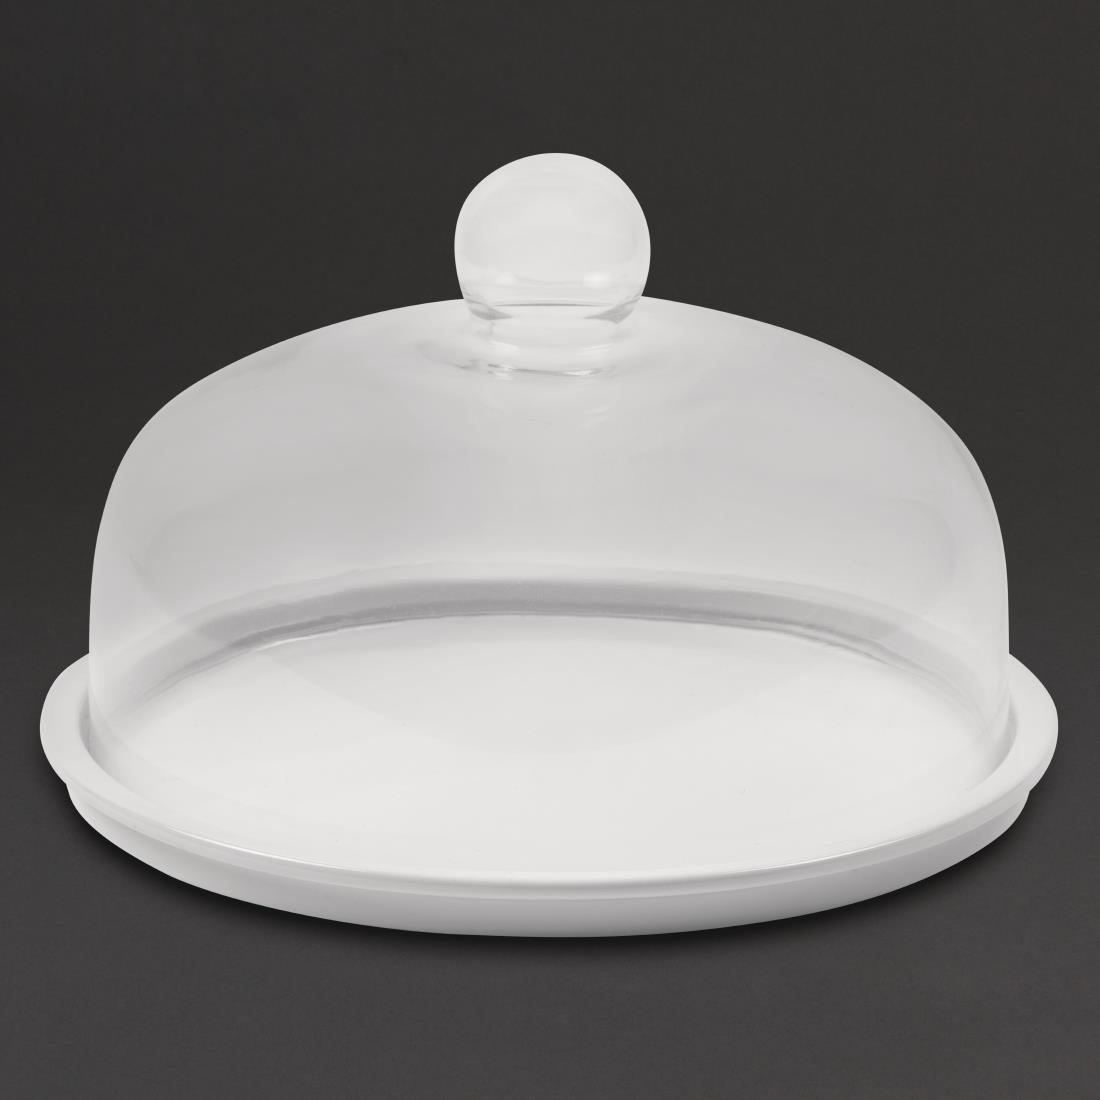 Porcelain Cake Stand Plate 285mm - CM748  - 2